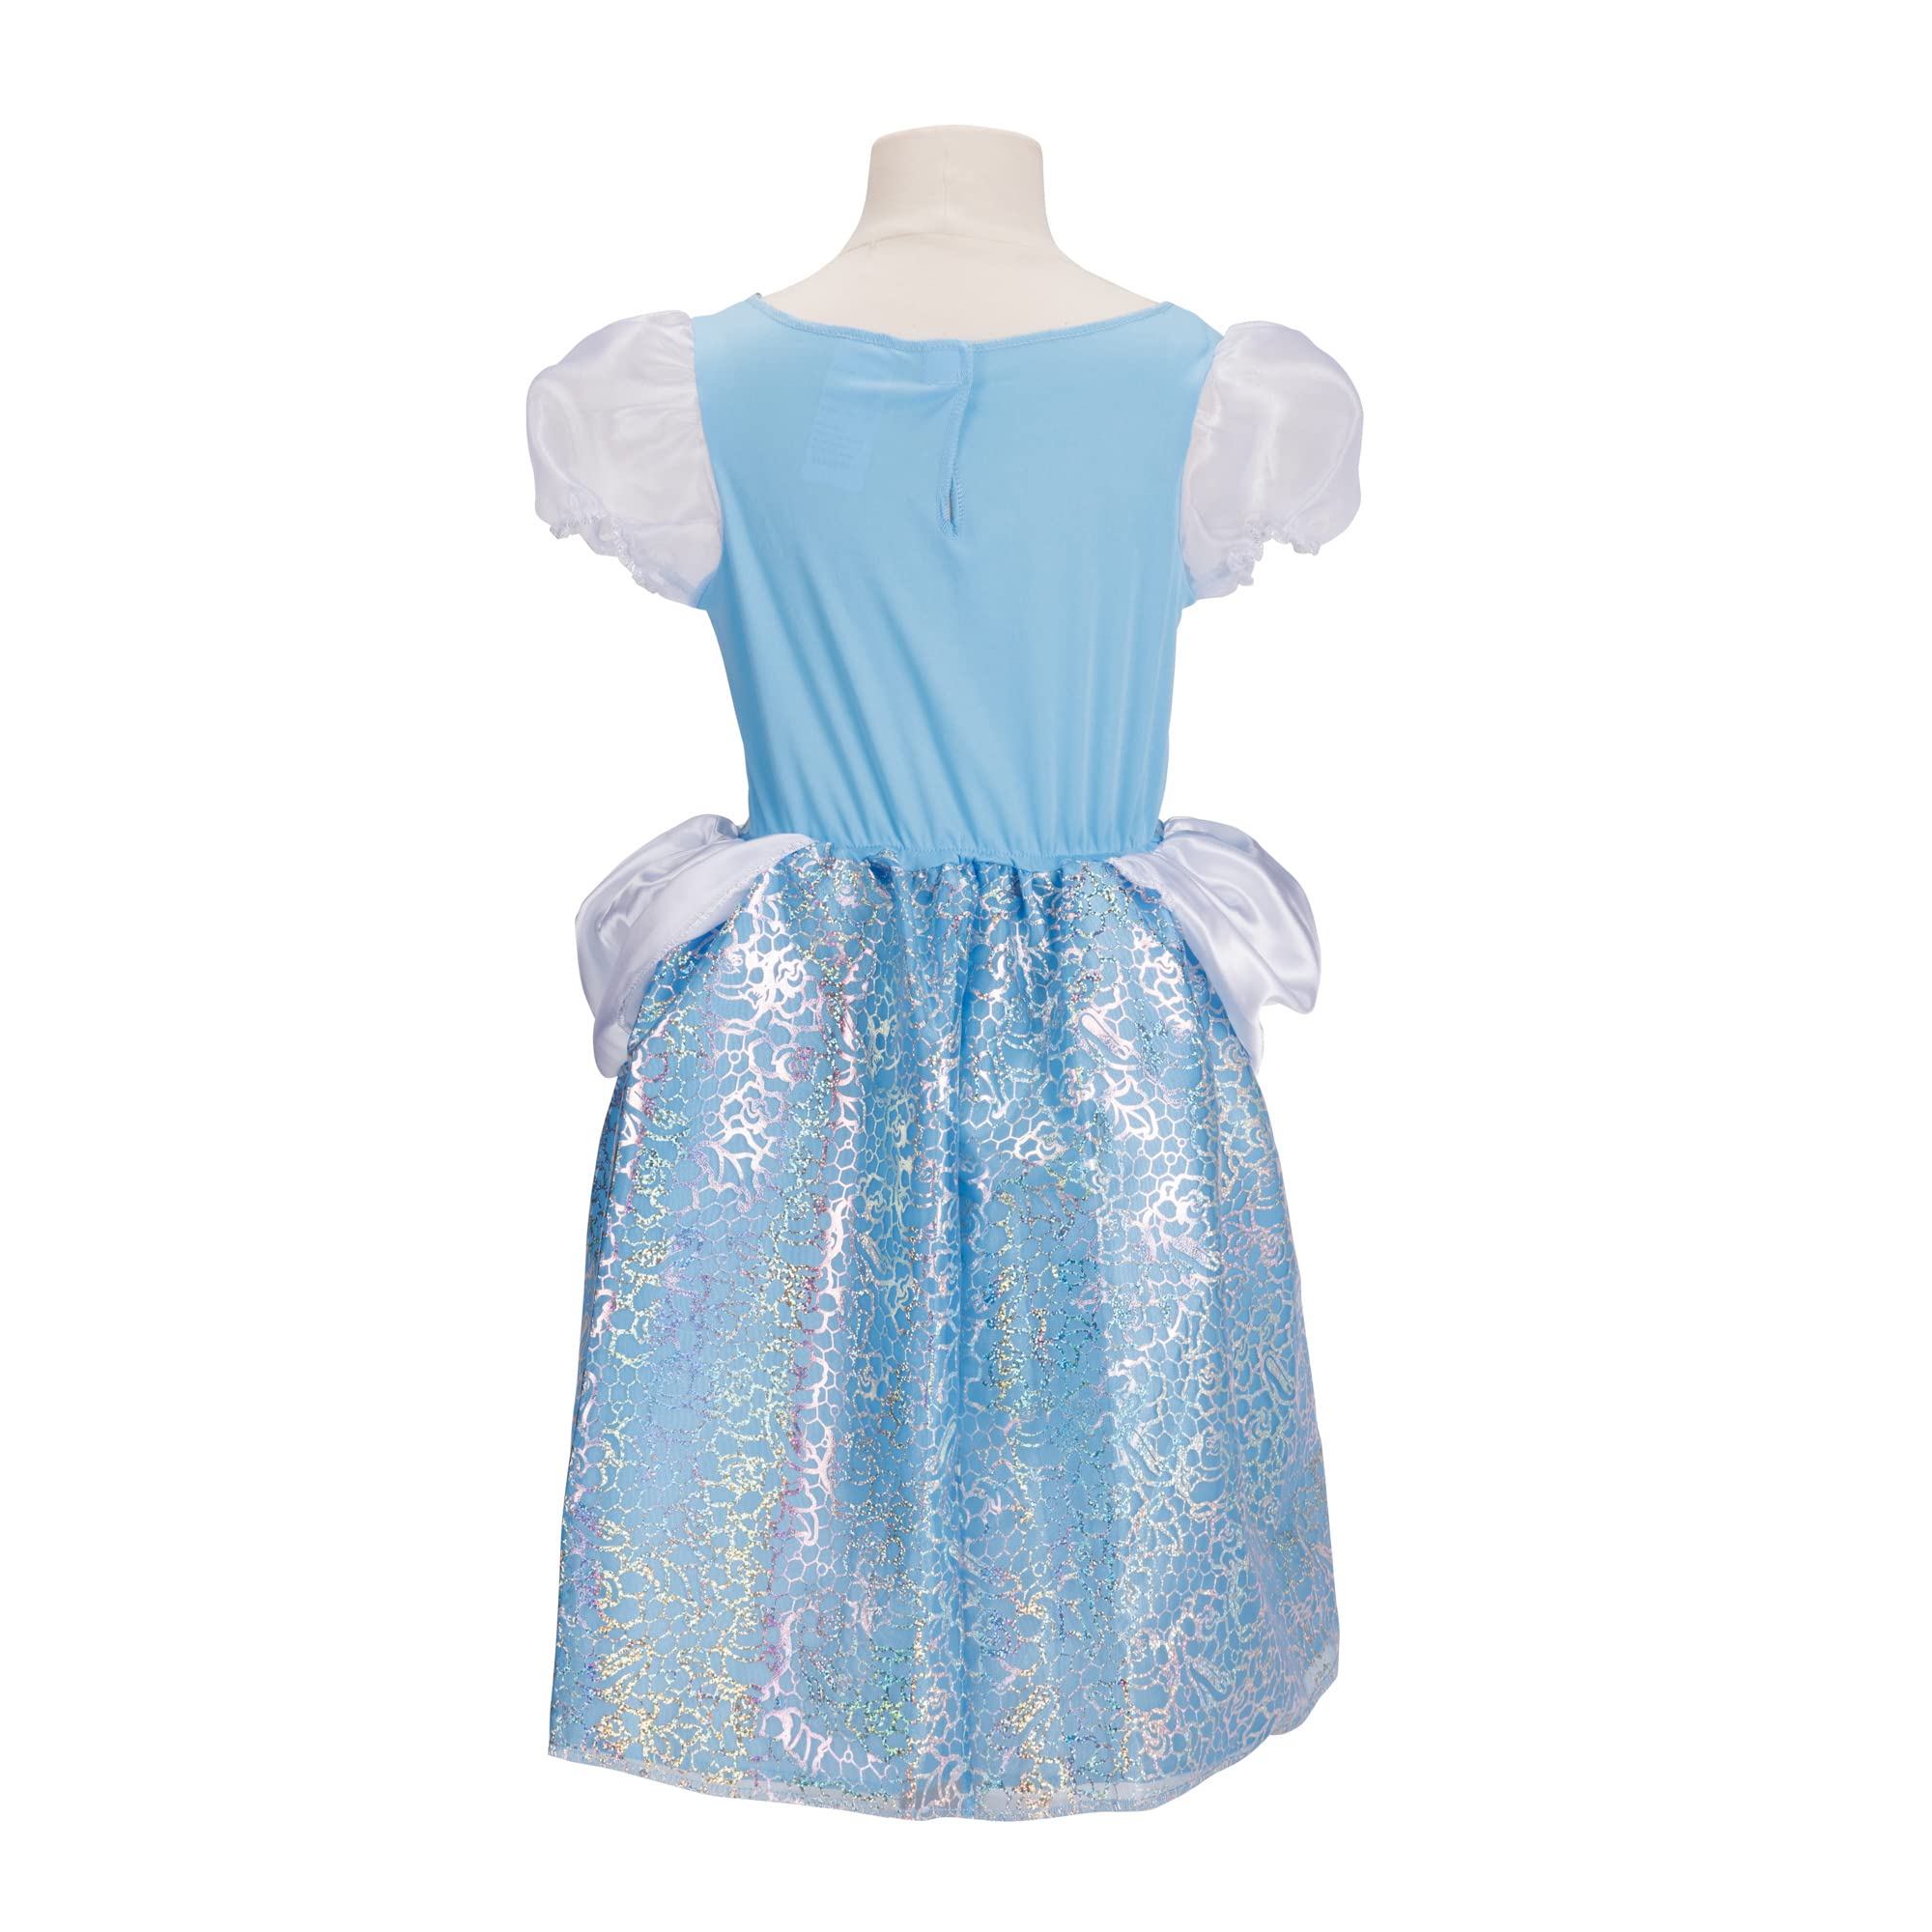 Disney Princess Disney 100 Cinderella Dress Costume for Girls, Perfect for Party, Halloween Or Pretend Play Dress Up Child Size 4-6X